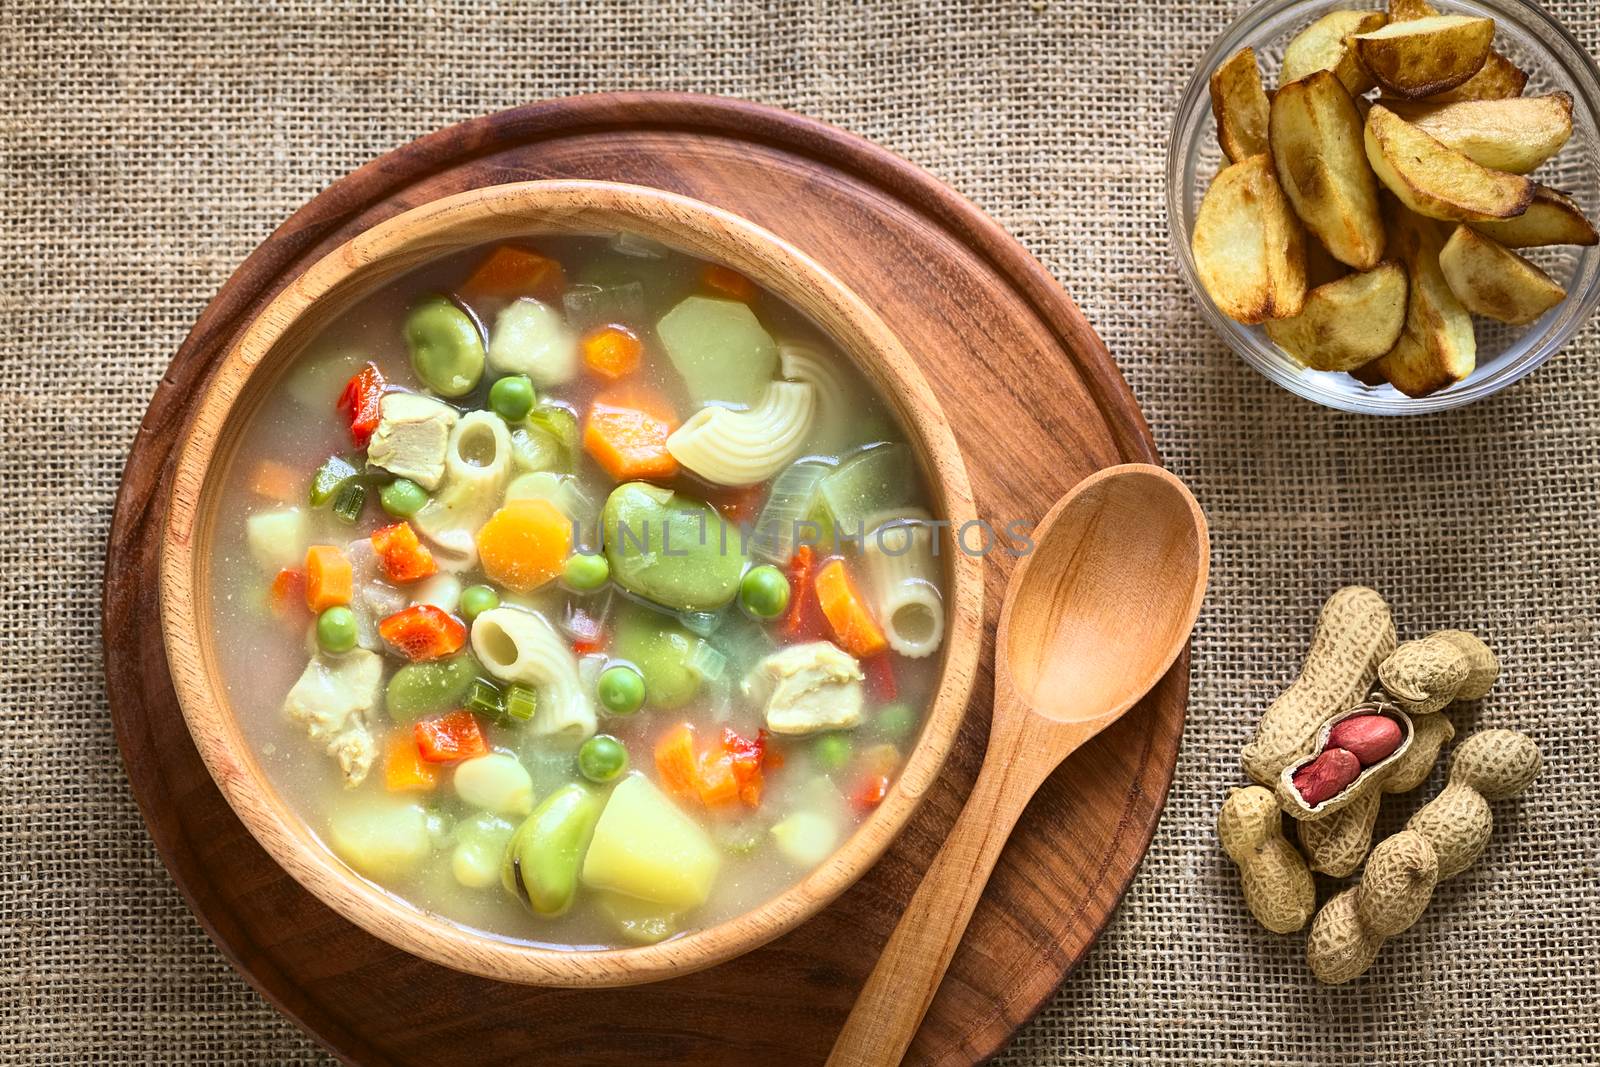 Overhead shot of Bolivian traditional Sopa de Mani (peanut soup) made of meat, pasta, vegetables (pea, carrot, potato, broad bean, pepper, corn) with ground peanut in wooden bowl, traditionally served with fried potatoes, photographed with natural light 